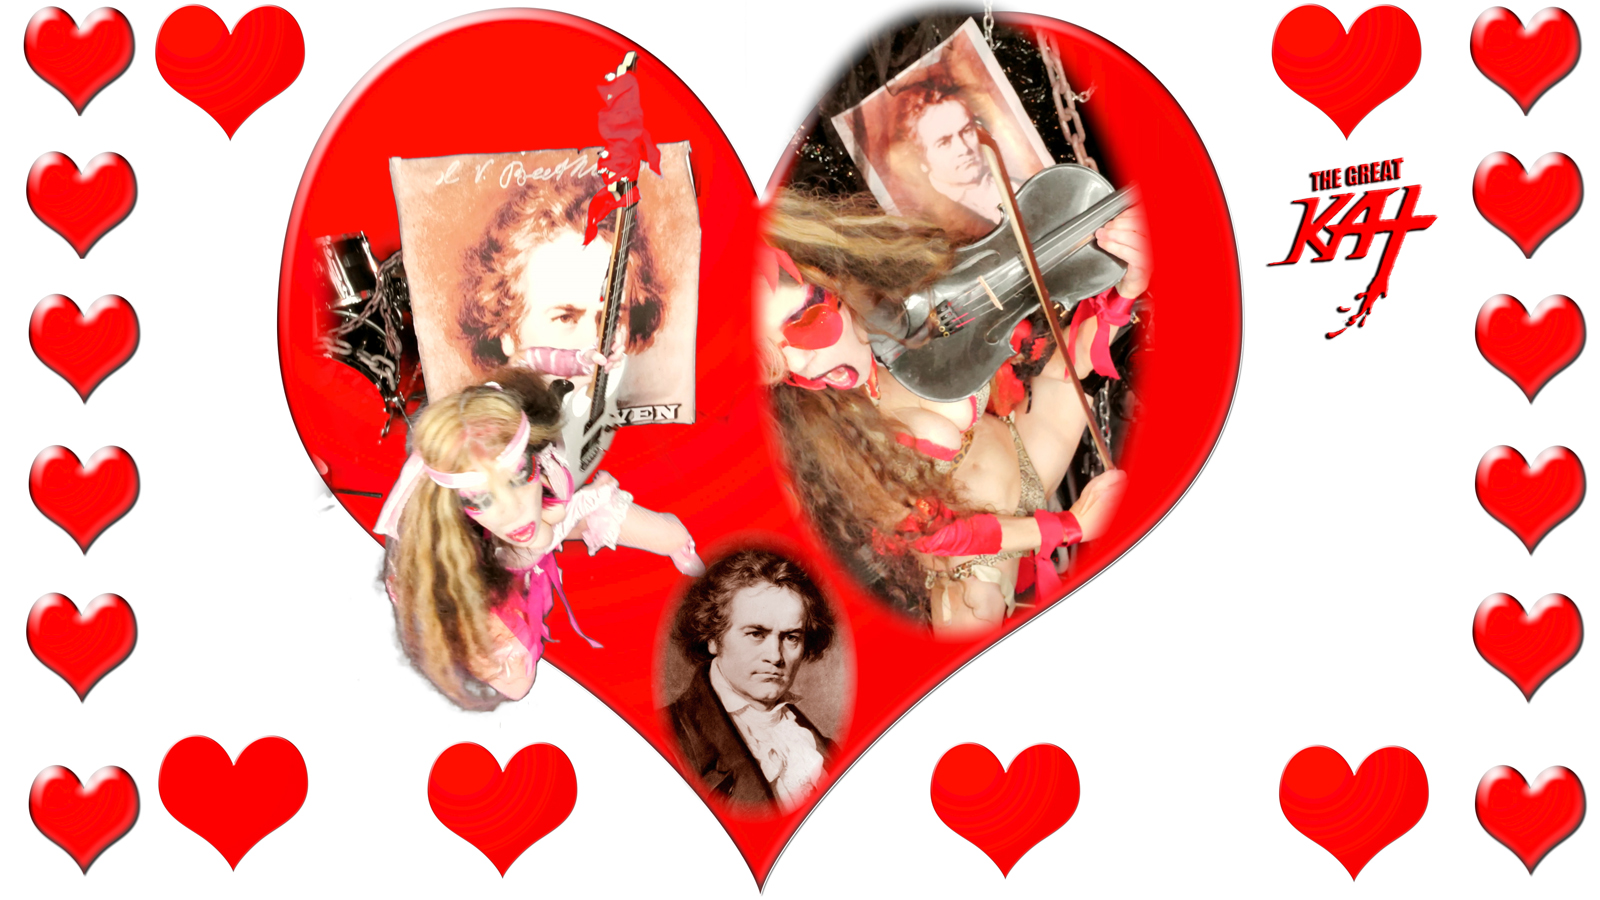 HAPPY SHREDDING VALENTINE'S DAY! LOVE, THE GREAT KAT & BEETHOVEN! BEETHOVEN'S VIOLIN CONCERTO for GUITAR AND VIOLIN! From NEW BEETHOVEN RECORDING AND MUSIC VIDEO! CELEBRATE BEETHOVEN'S 250TH BIRTHDAY-DEC 16, 2020-with THE GREAT KAT REINCARNATION of BEETHOVEN! 